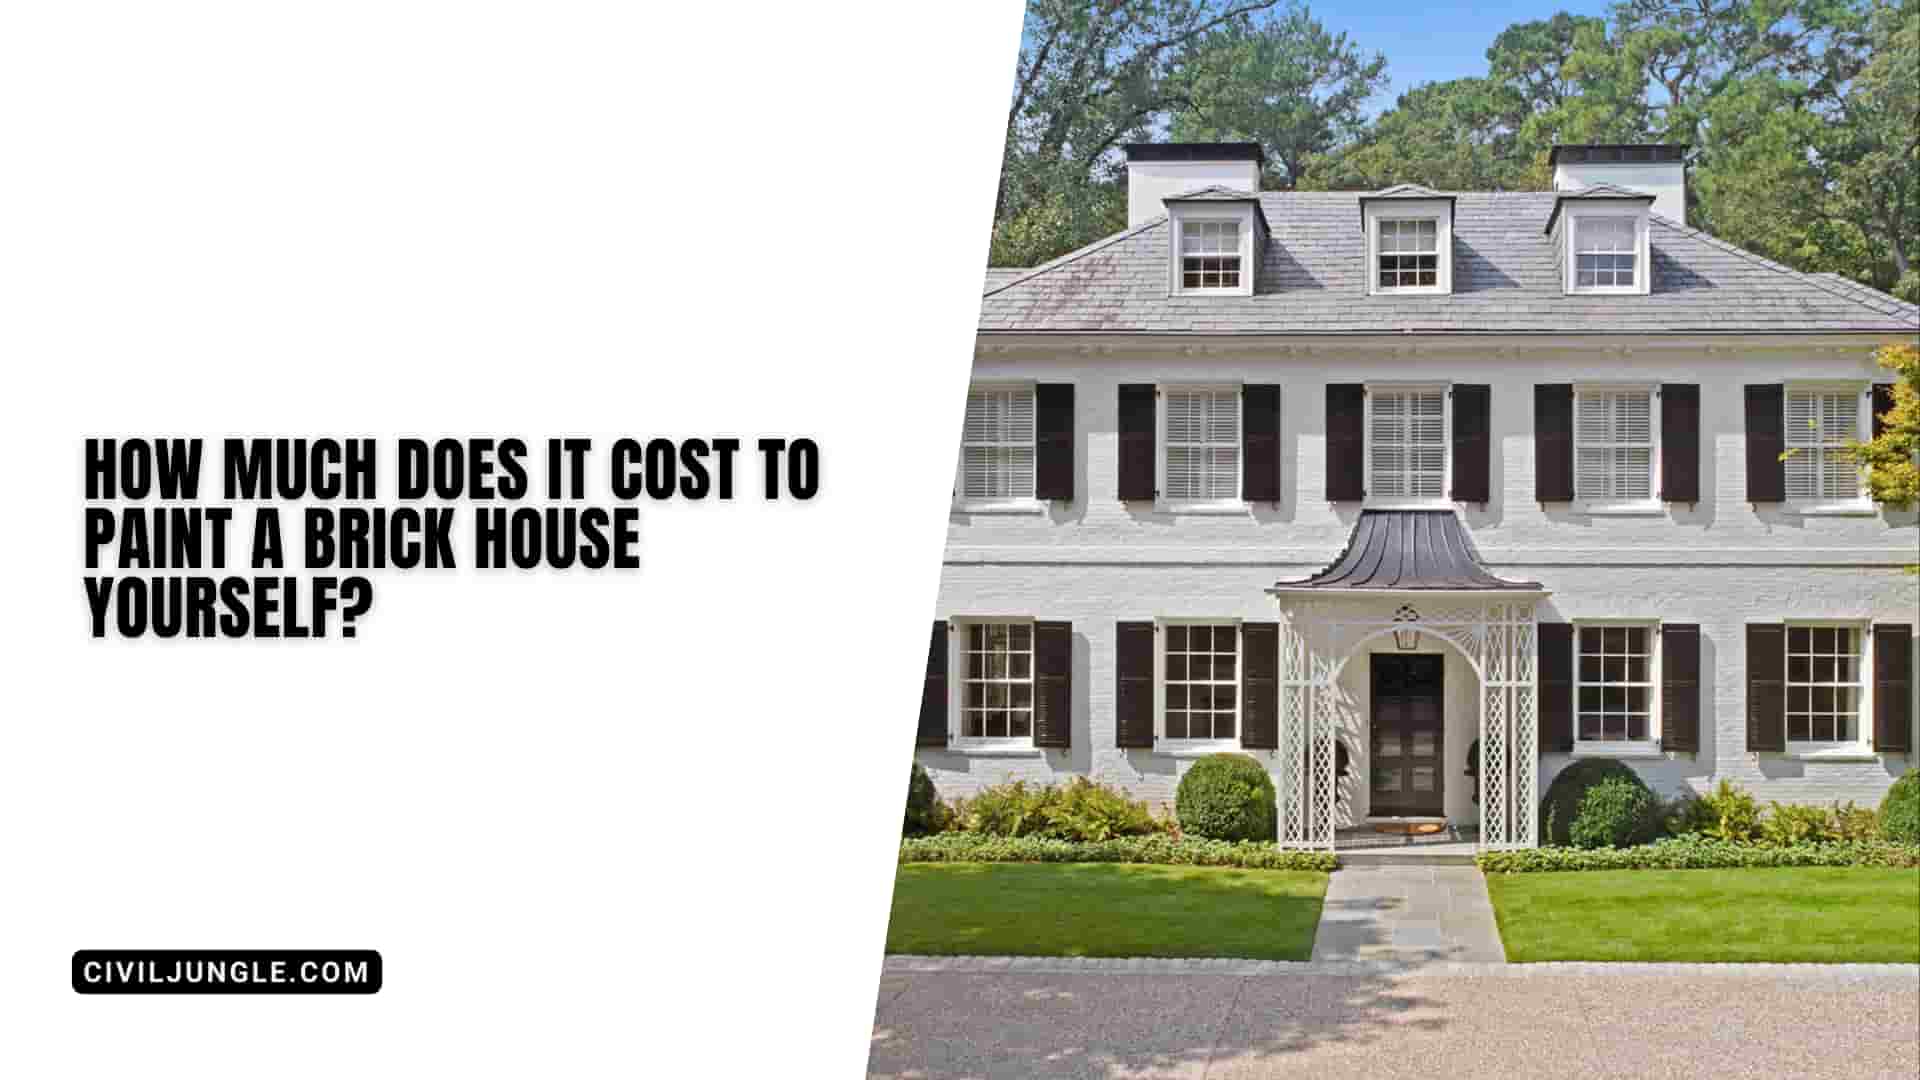 How Much Does It Cost to Paint a Brick House Yourself?